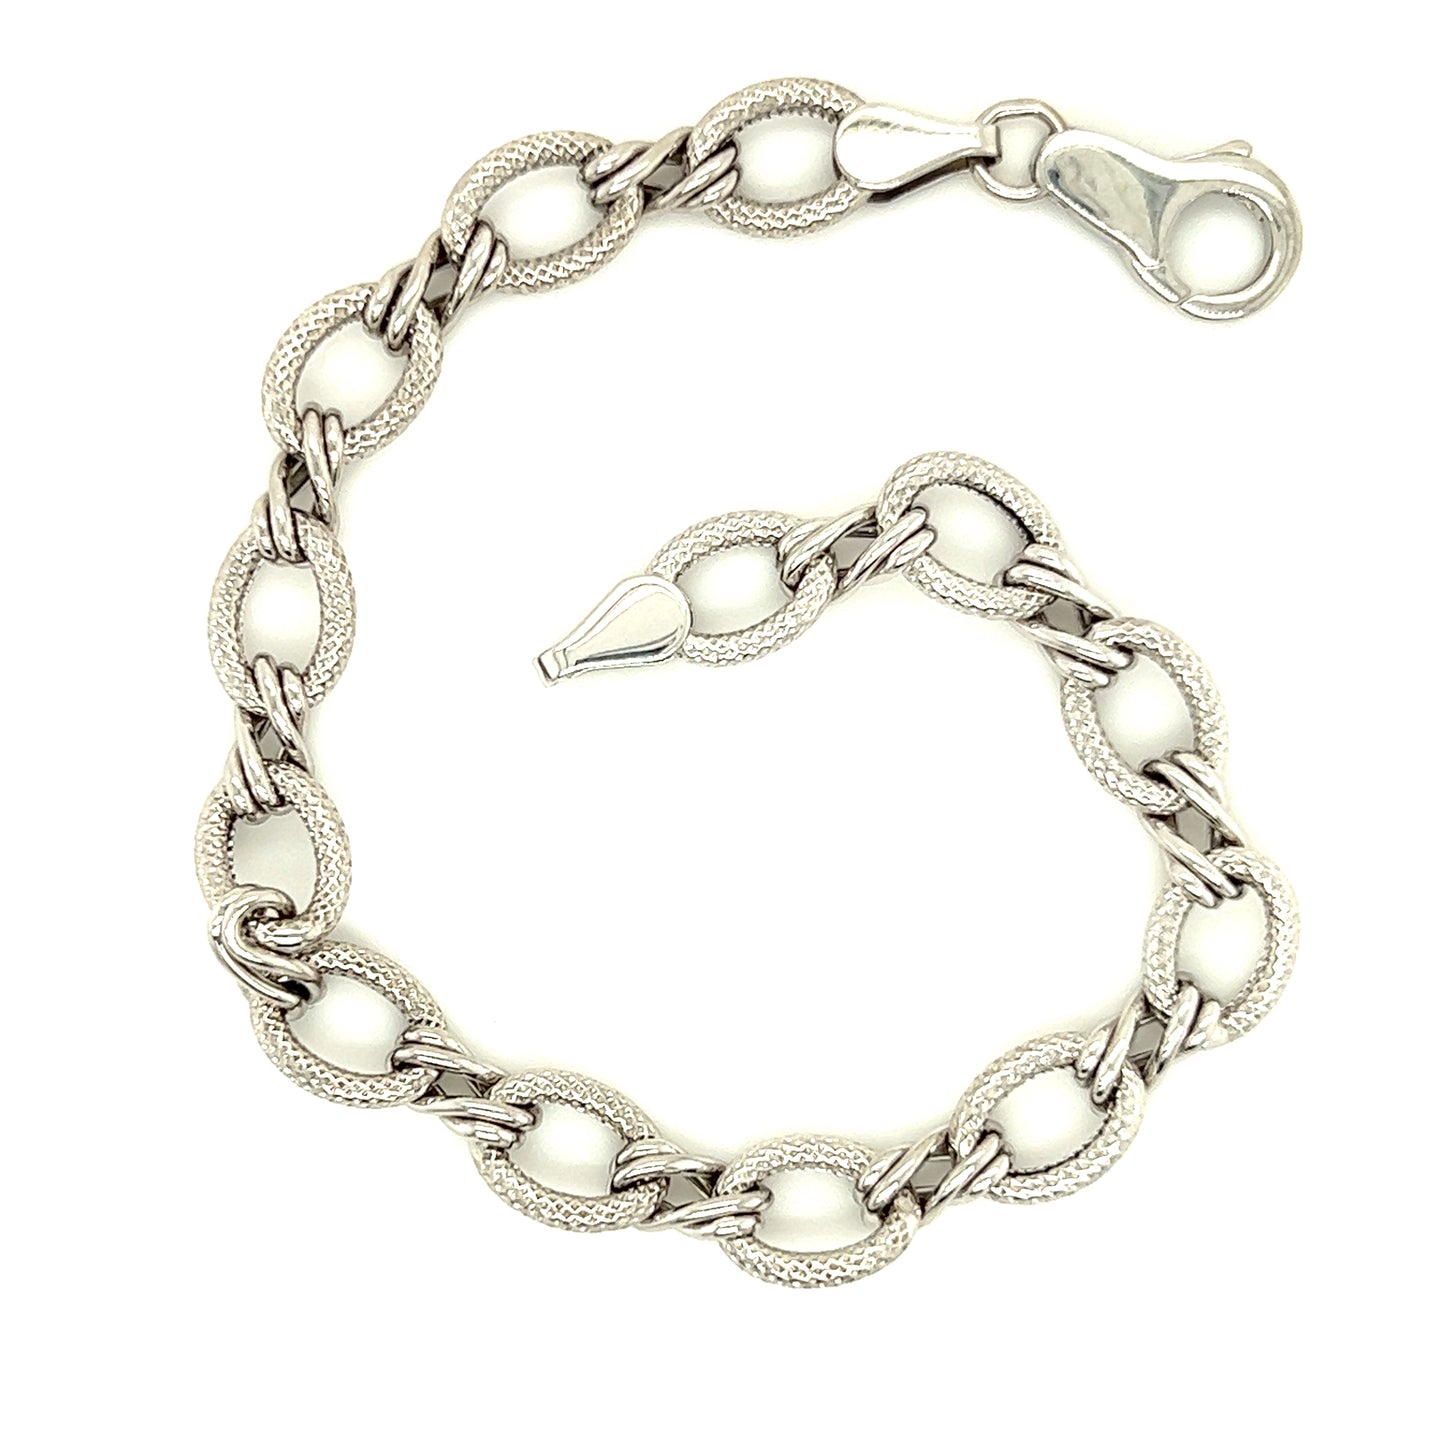 Fancy Bracelet with Textured and Twisted Links in 14K White Gold Alternative View